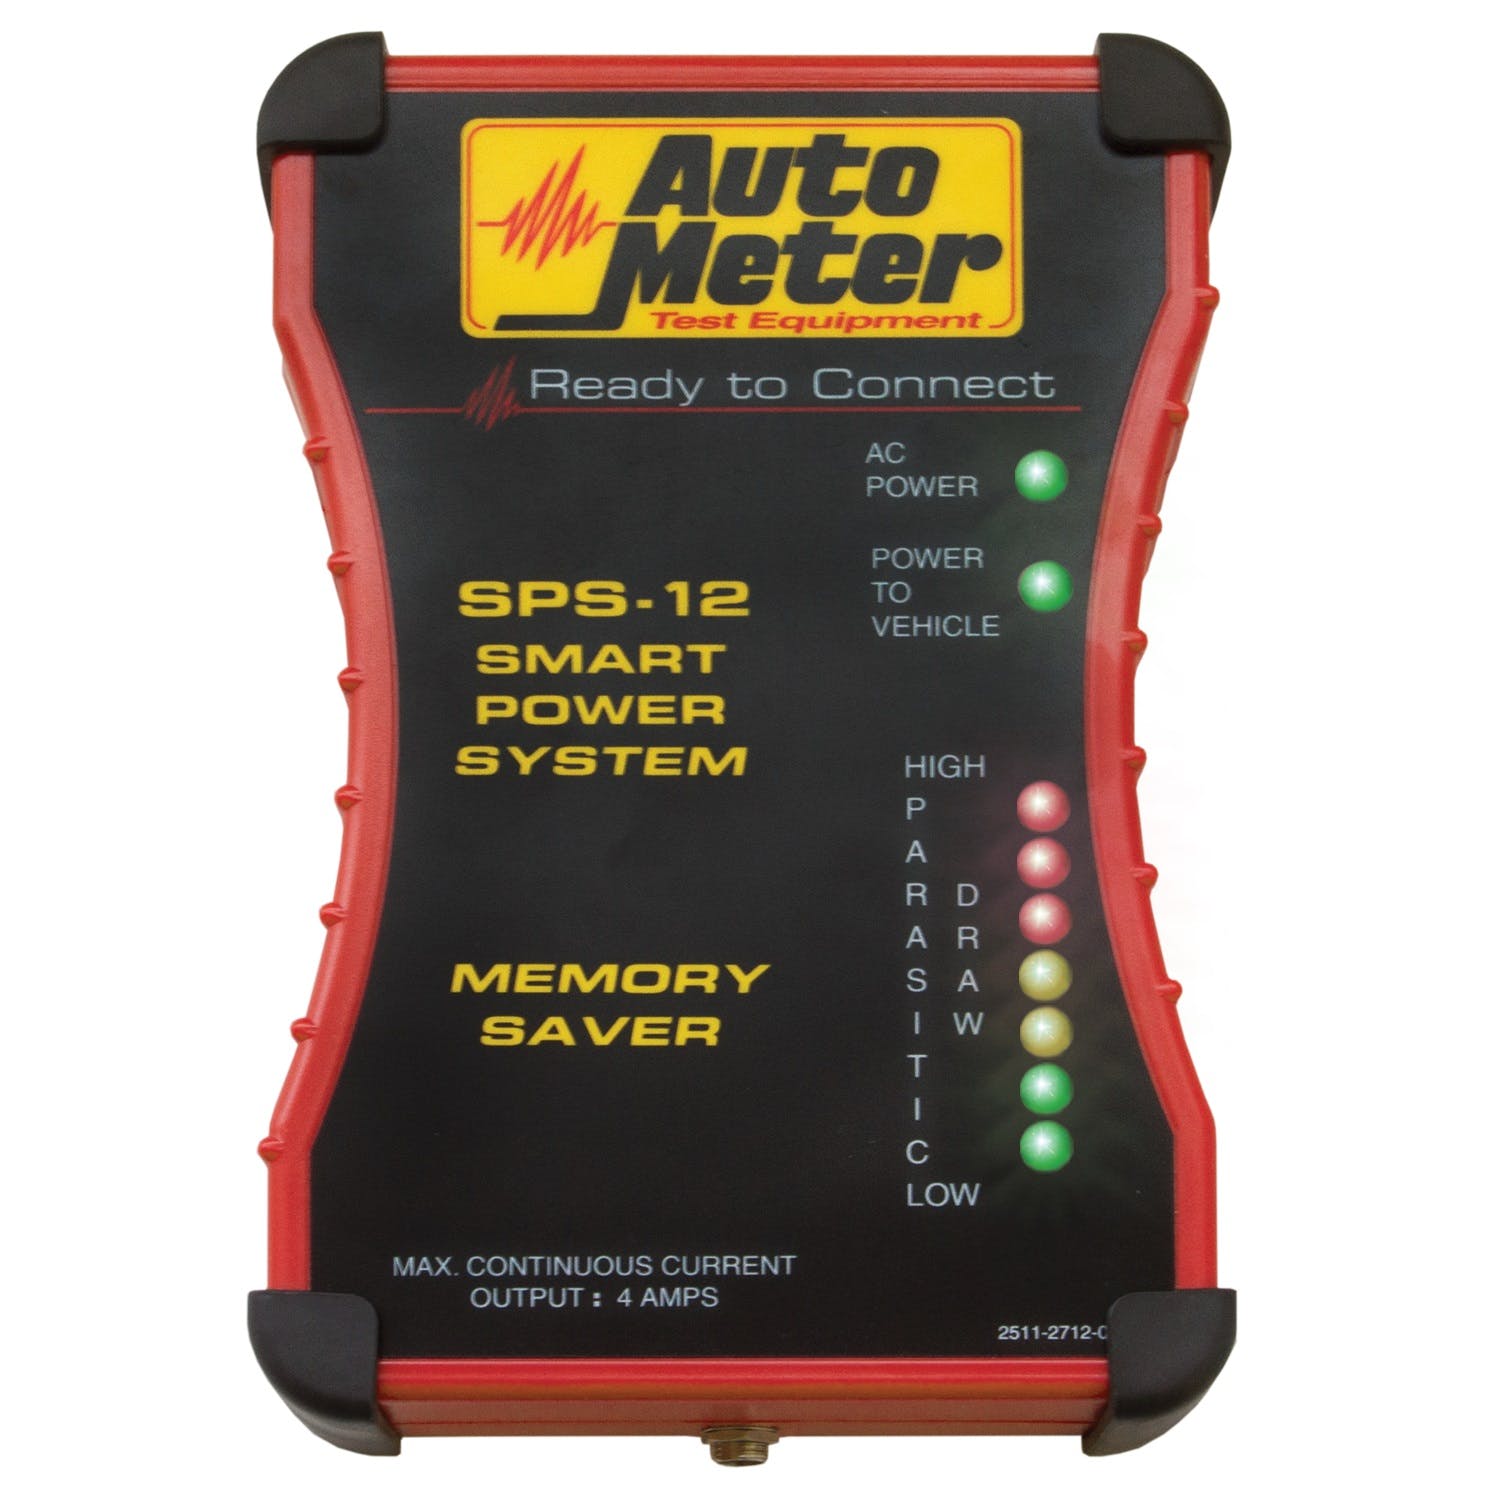 AutoMeter Products SPS-12 Smart Power System Memory Saver